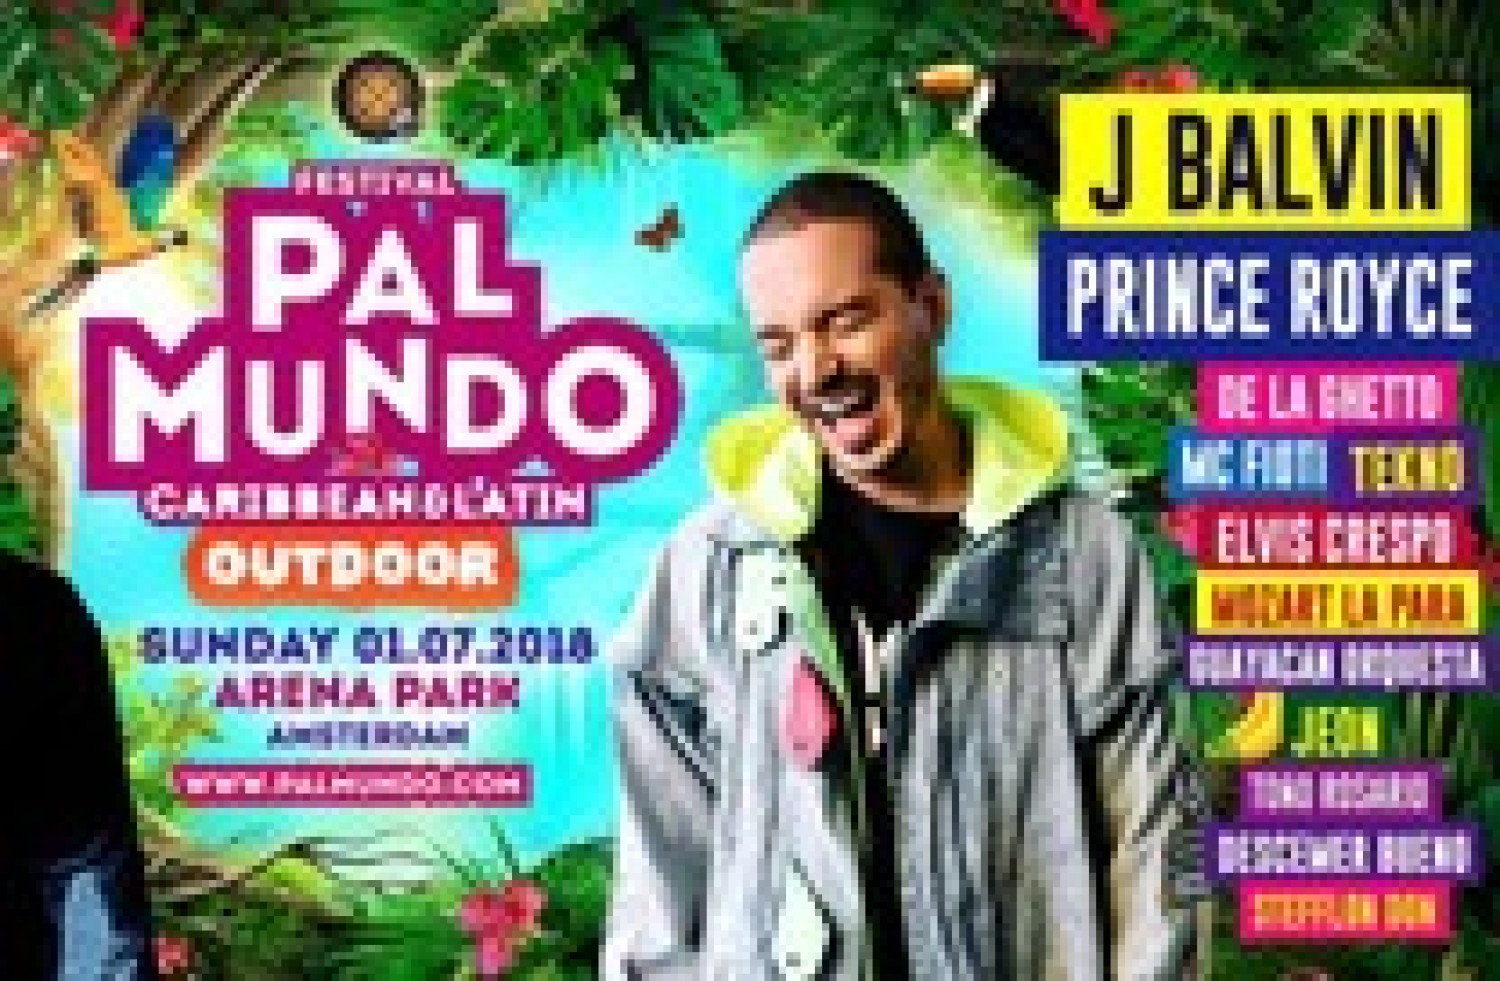 Party report: Festival Pal Mundo Outdoor 2018, Amsterdam (01-07-2018)